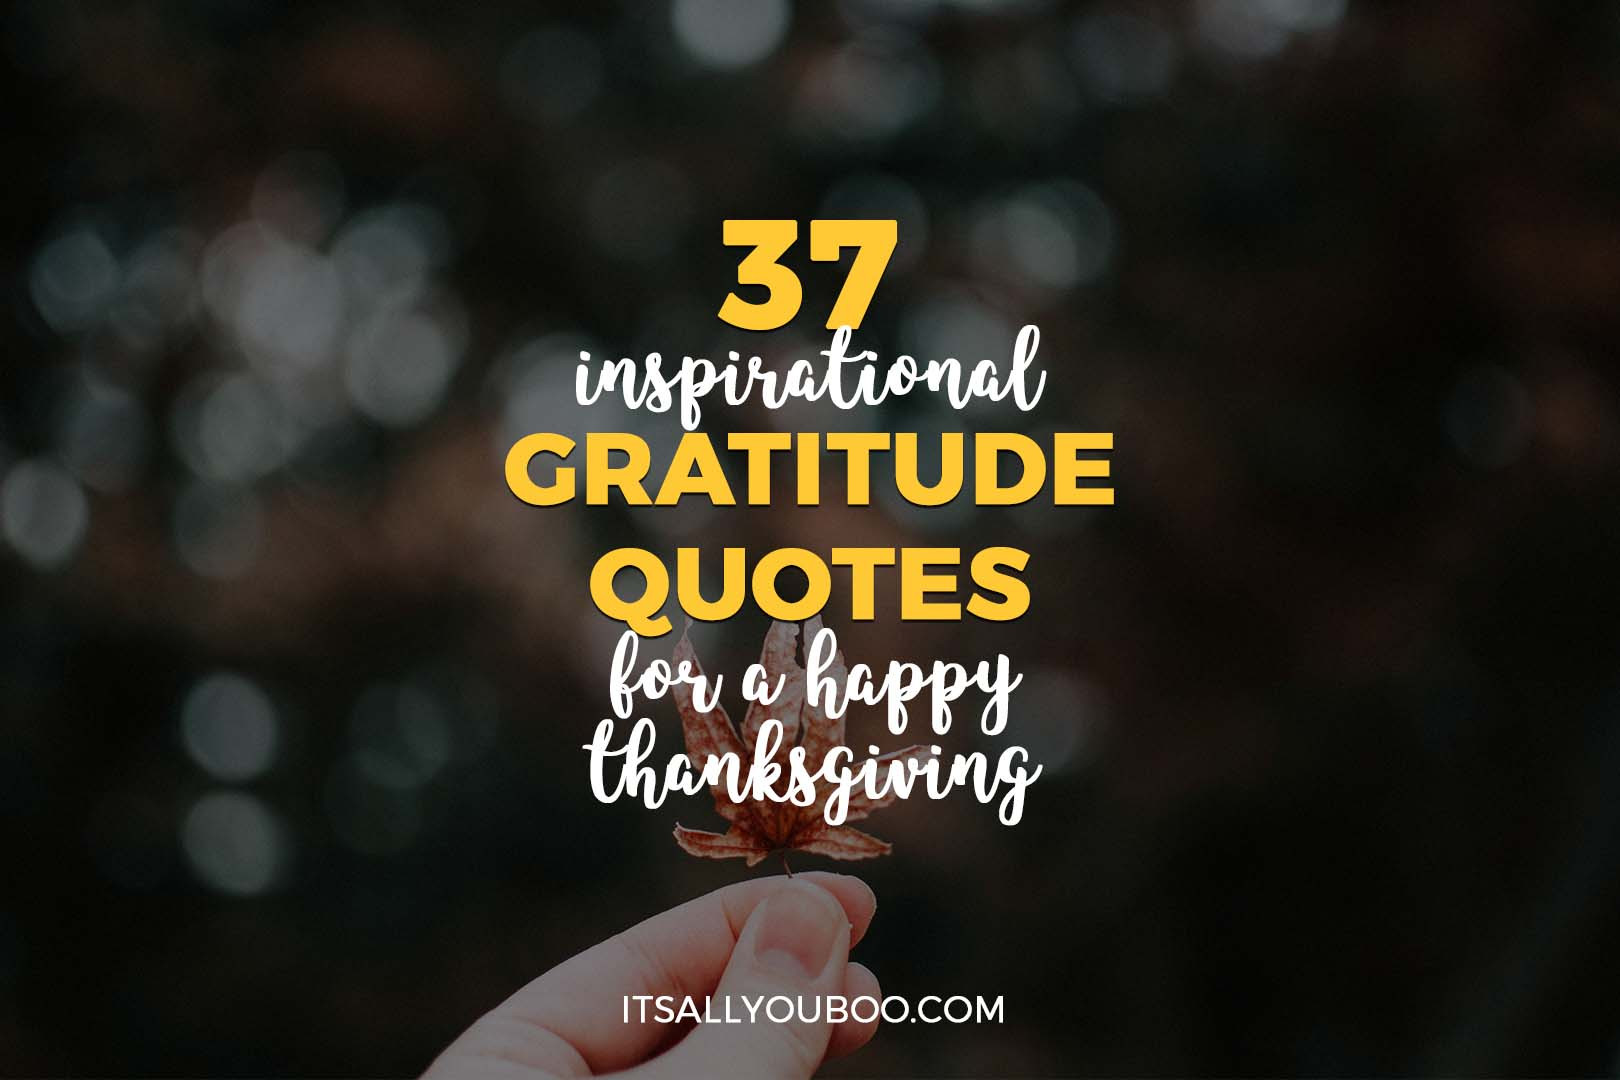 Quotes On Thanksgiving And Gratitude
 37 Inspirational Gratitude Quotes for a Happy Thanksgiving